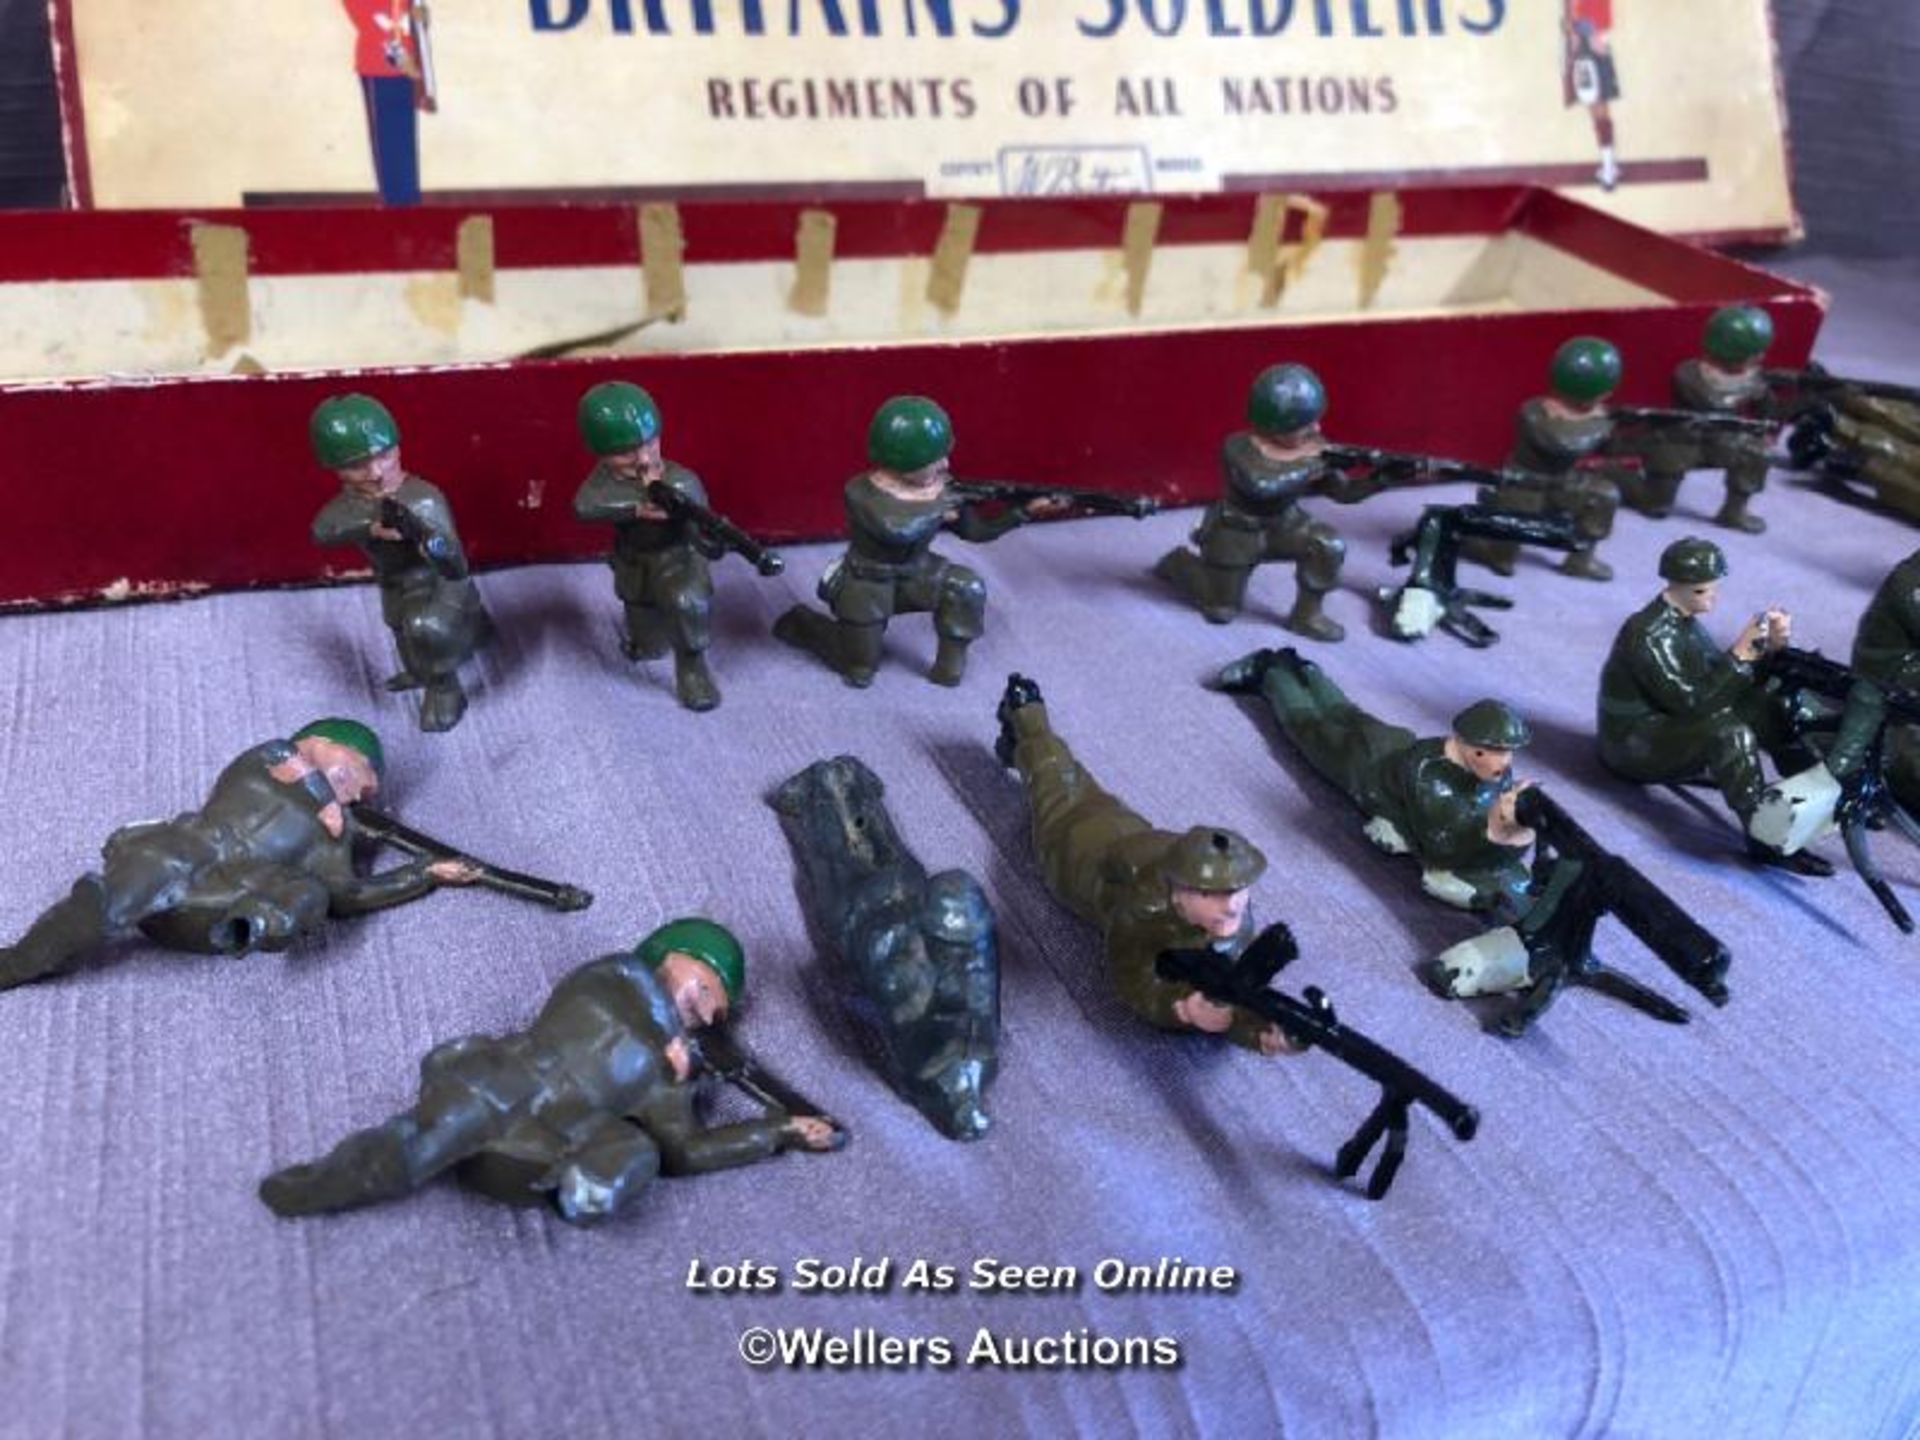 BRITAINS SOLDIERS REGIMENTS OF ALL NATIONS, WITH A NON MATCHING BOX NO. 2063 THE ARGYLL AND - Image 2 of 6